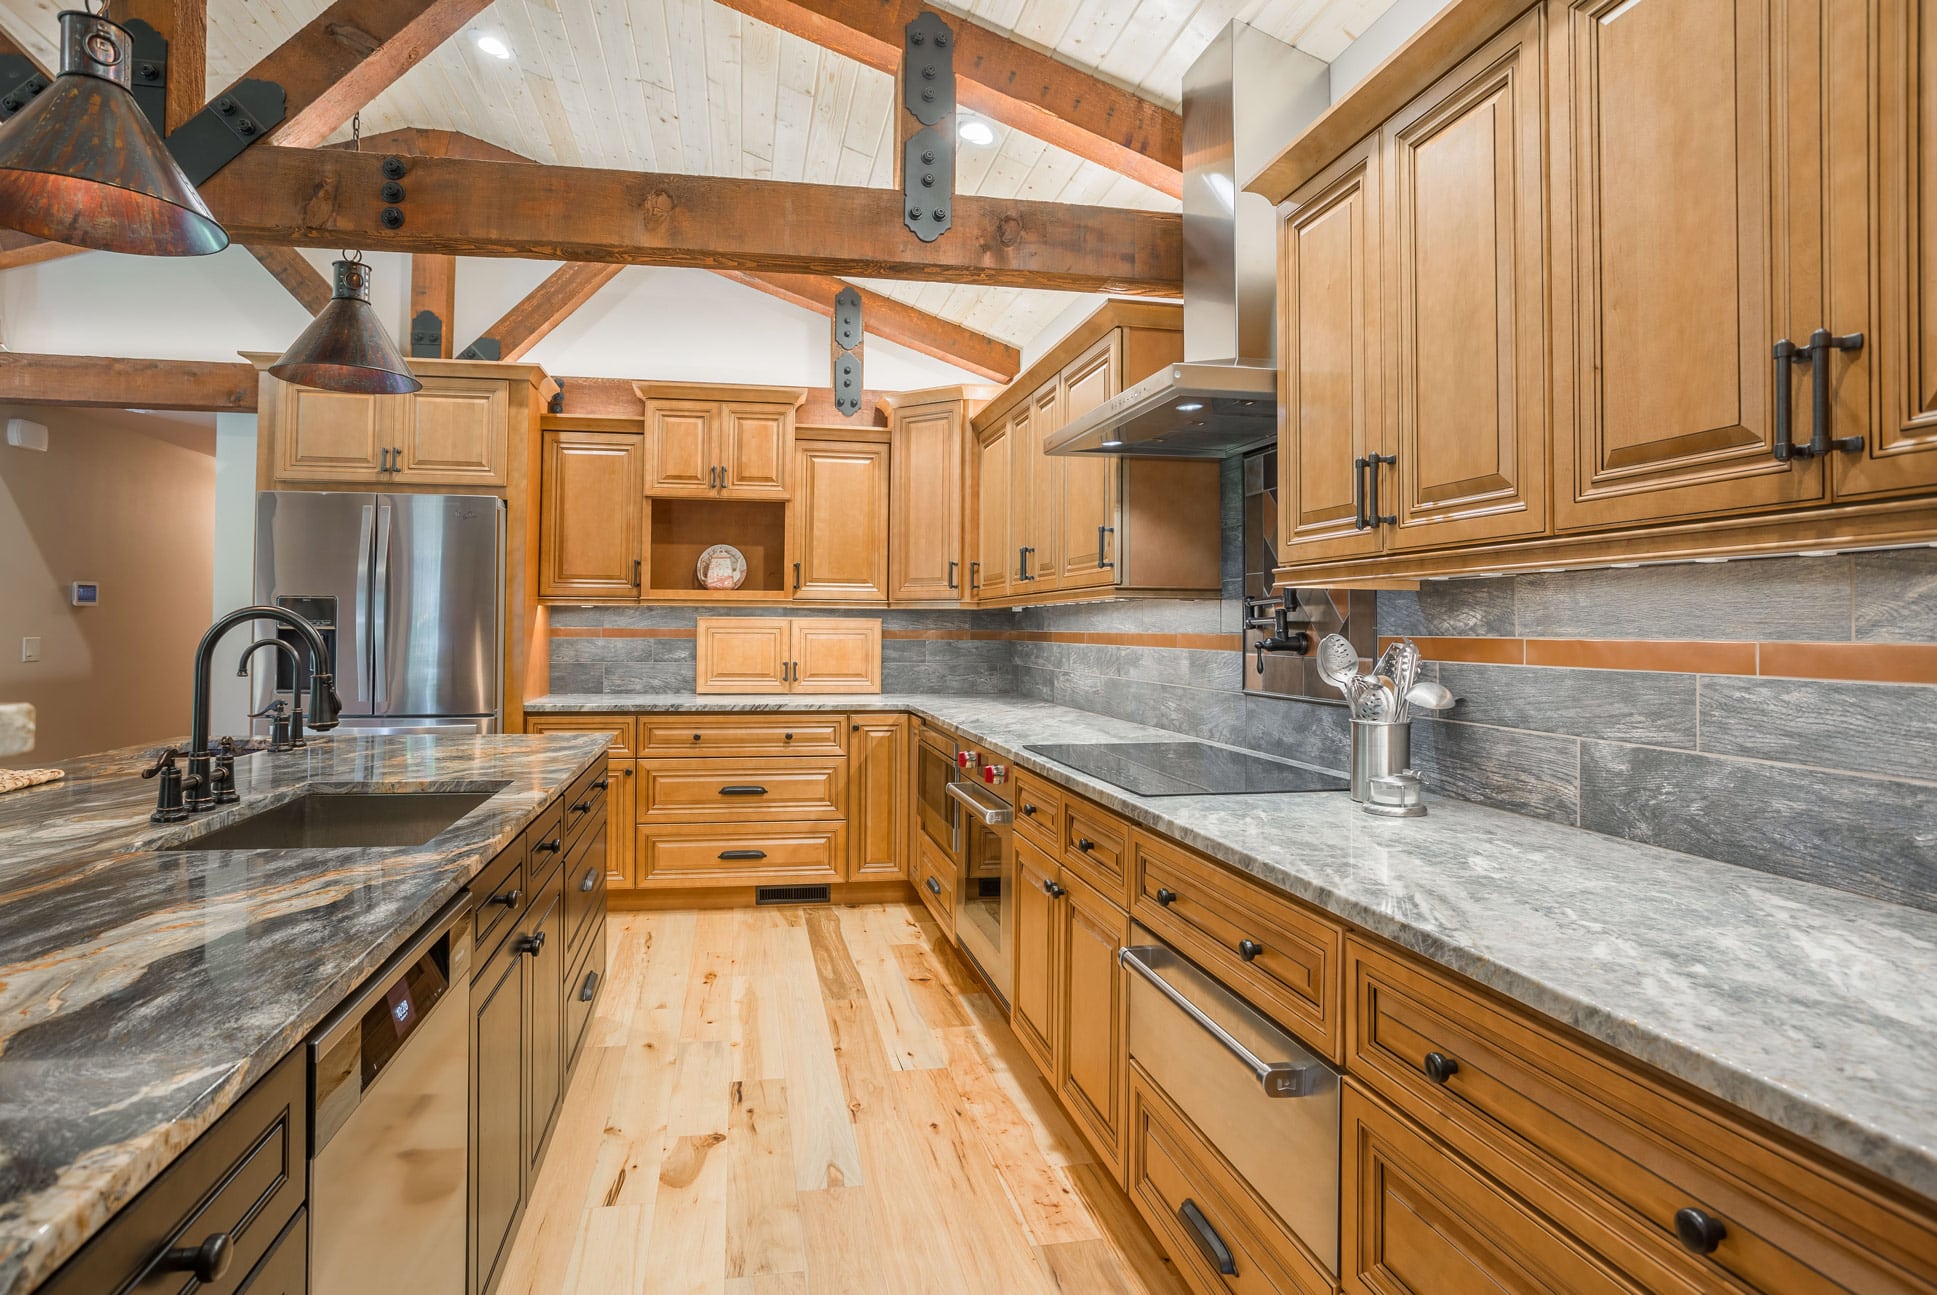 J&K wood kitchen cabinets with grey countertops